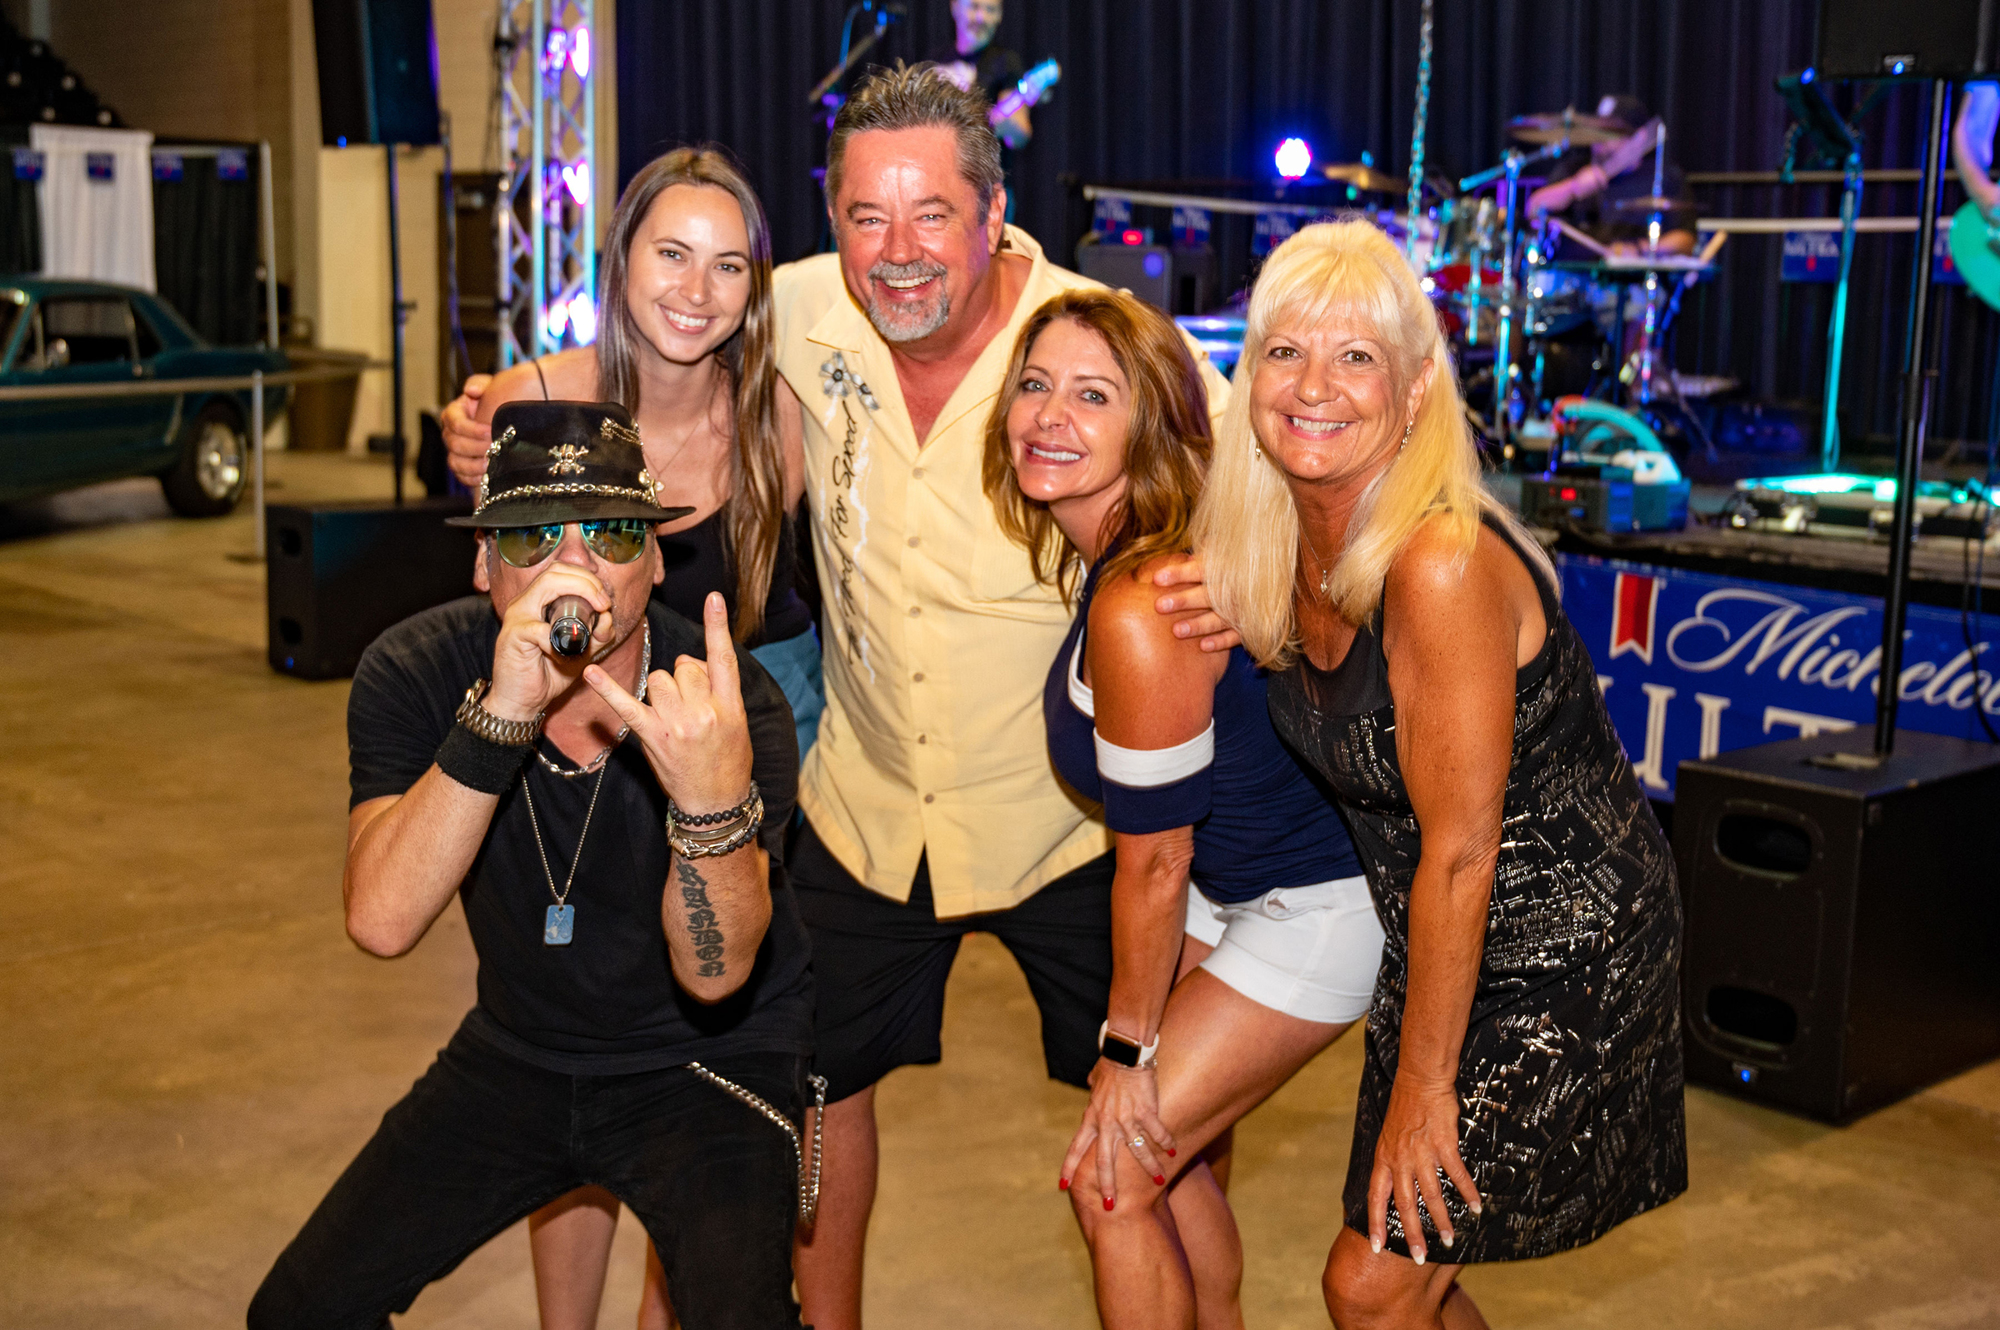 Hurricane Shane with Lisa Baer, Simon Williams, Dee Babcock and Lucy Nicandri at the Waves and Wheels party on July 9. (Photo courtesy of Lori Sax)